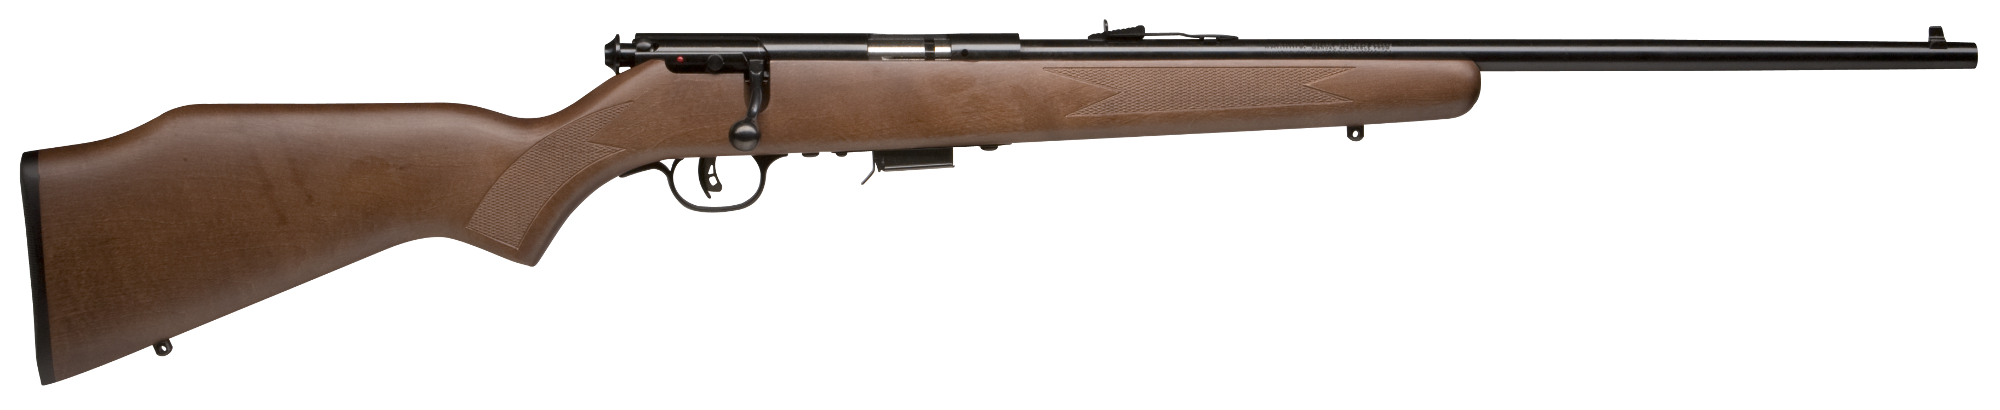 93 G Bolt Action Rifle - Savage Arms | Latulippe